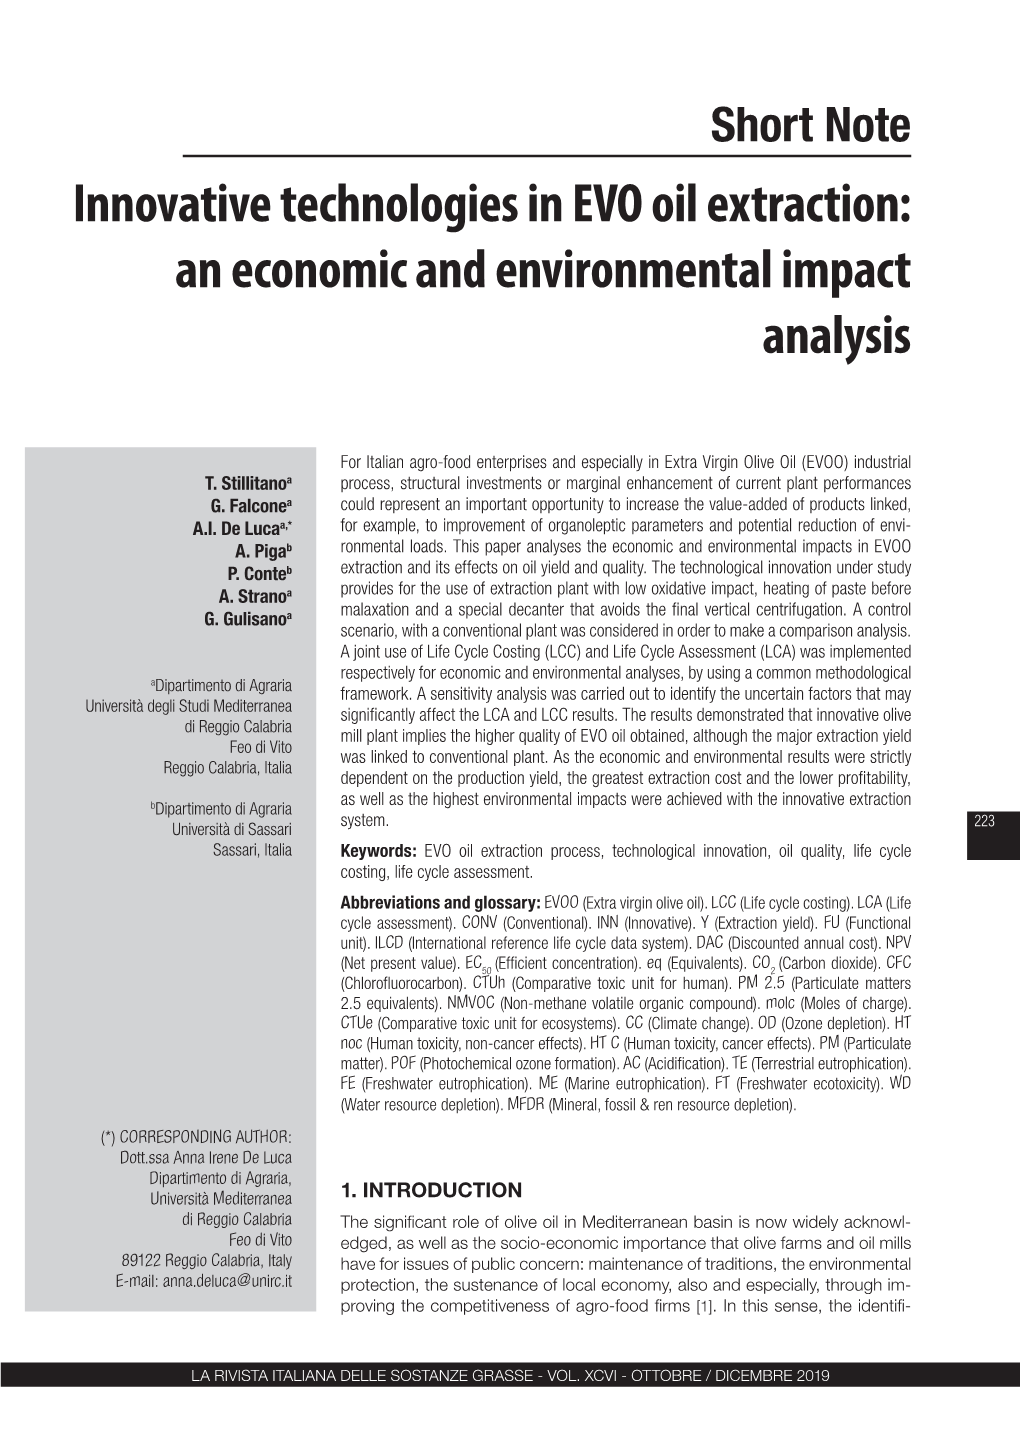 Innovative Technologies in EVO Oil Extraction: an Economic and Environmental Impact Analysis